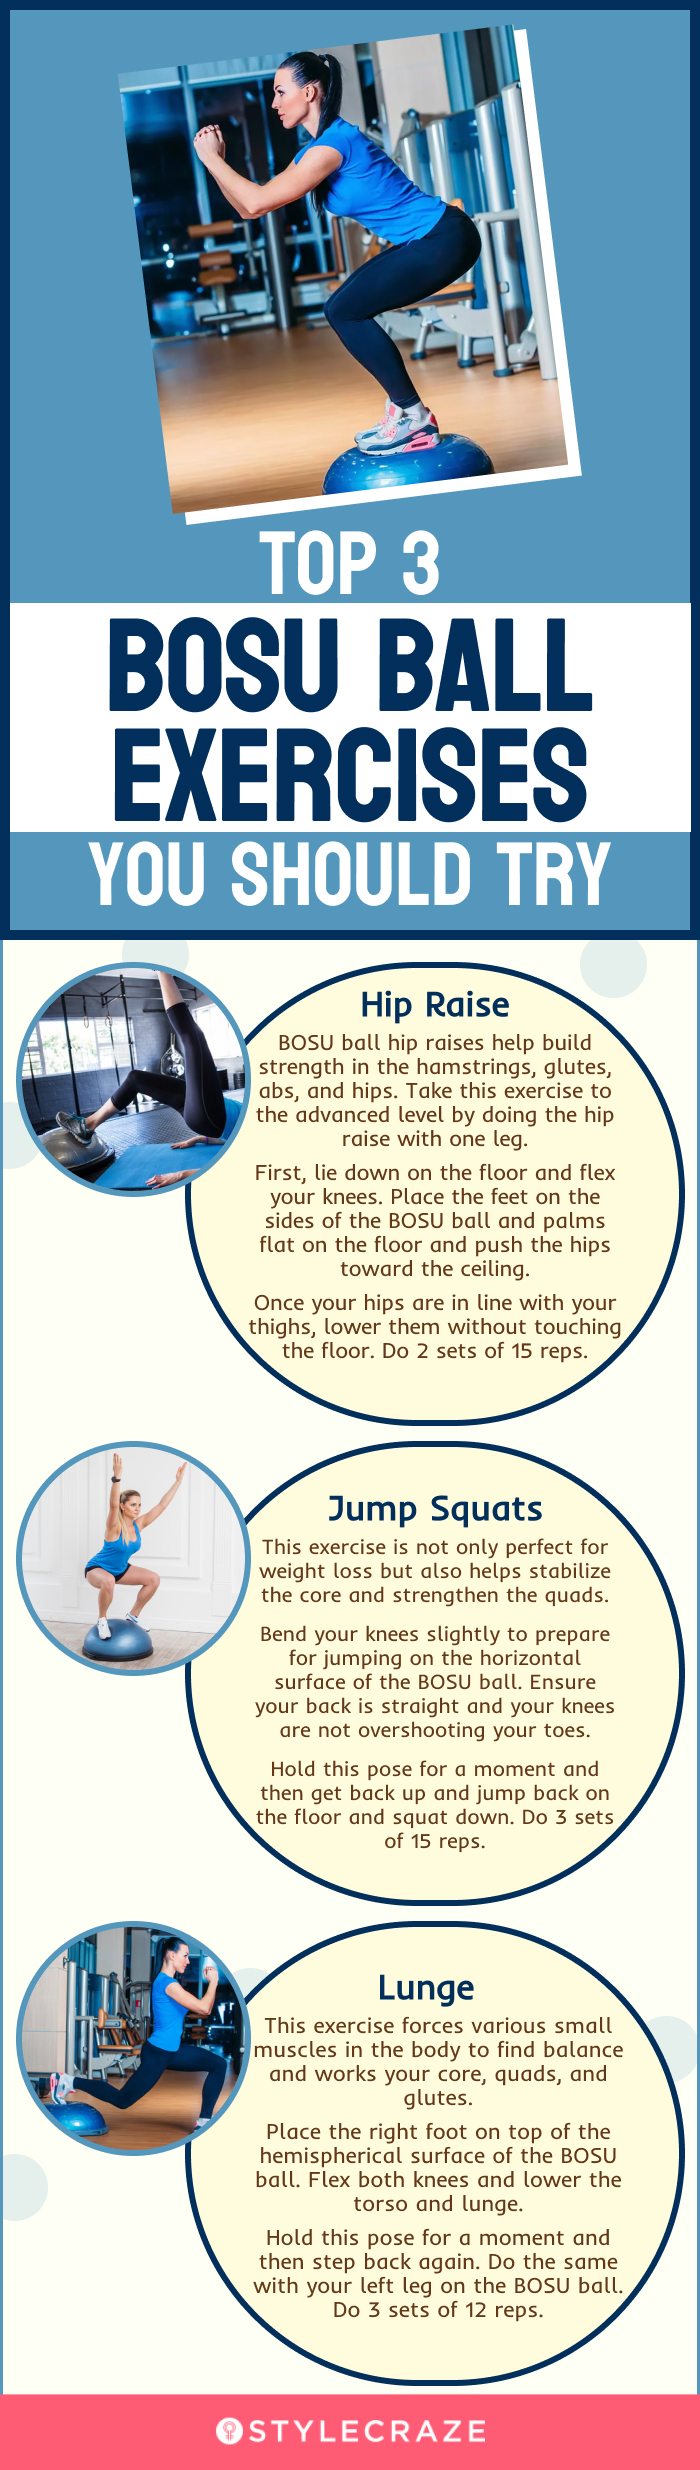 top 3 bosu ball exercises you should try [infographic]